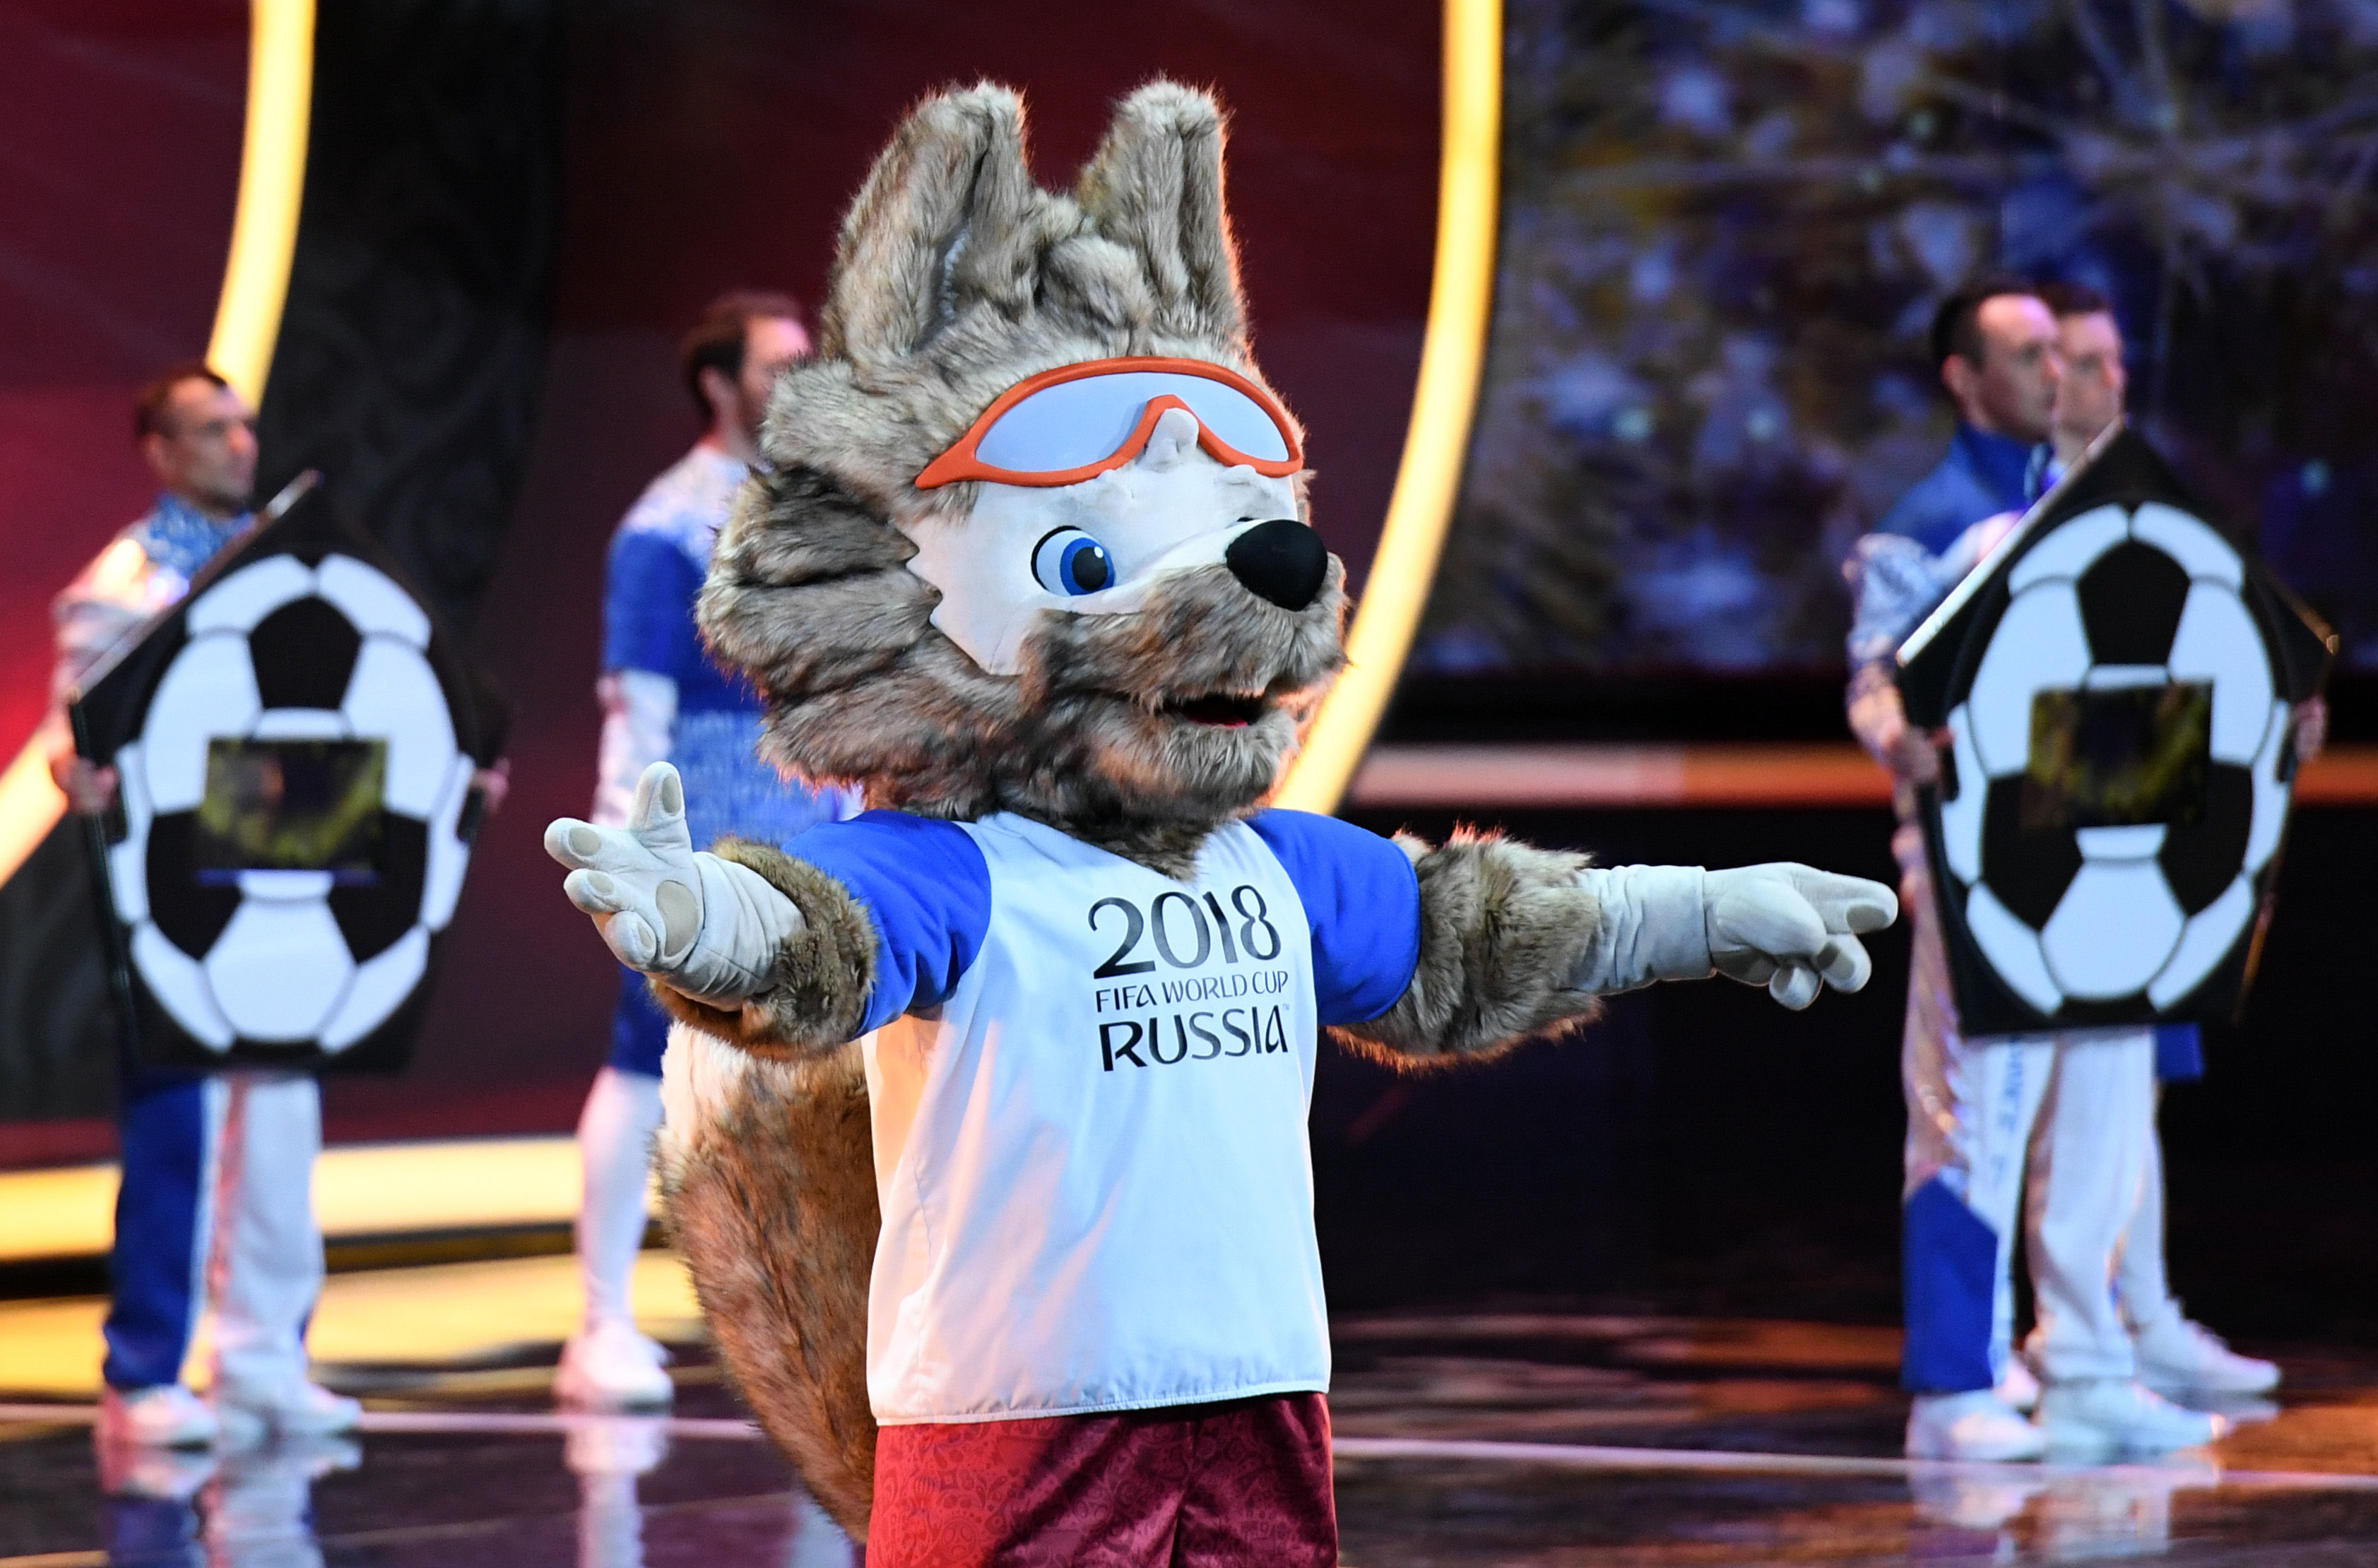 The official World Cup mascot makes an appearance